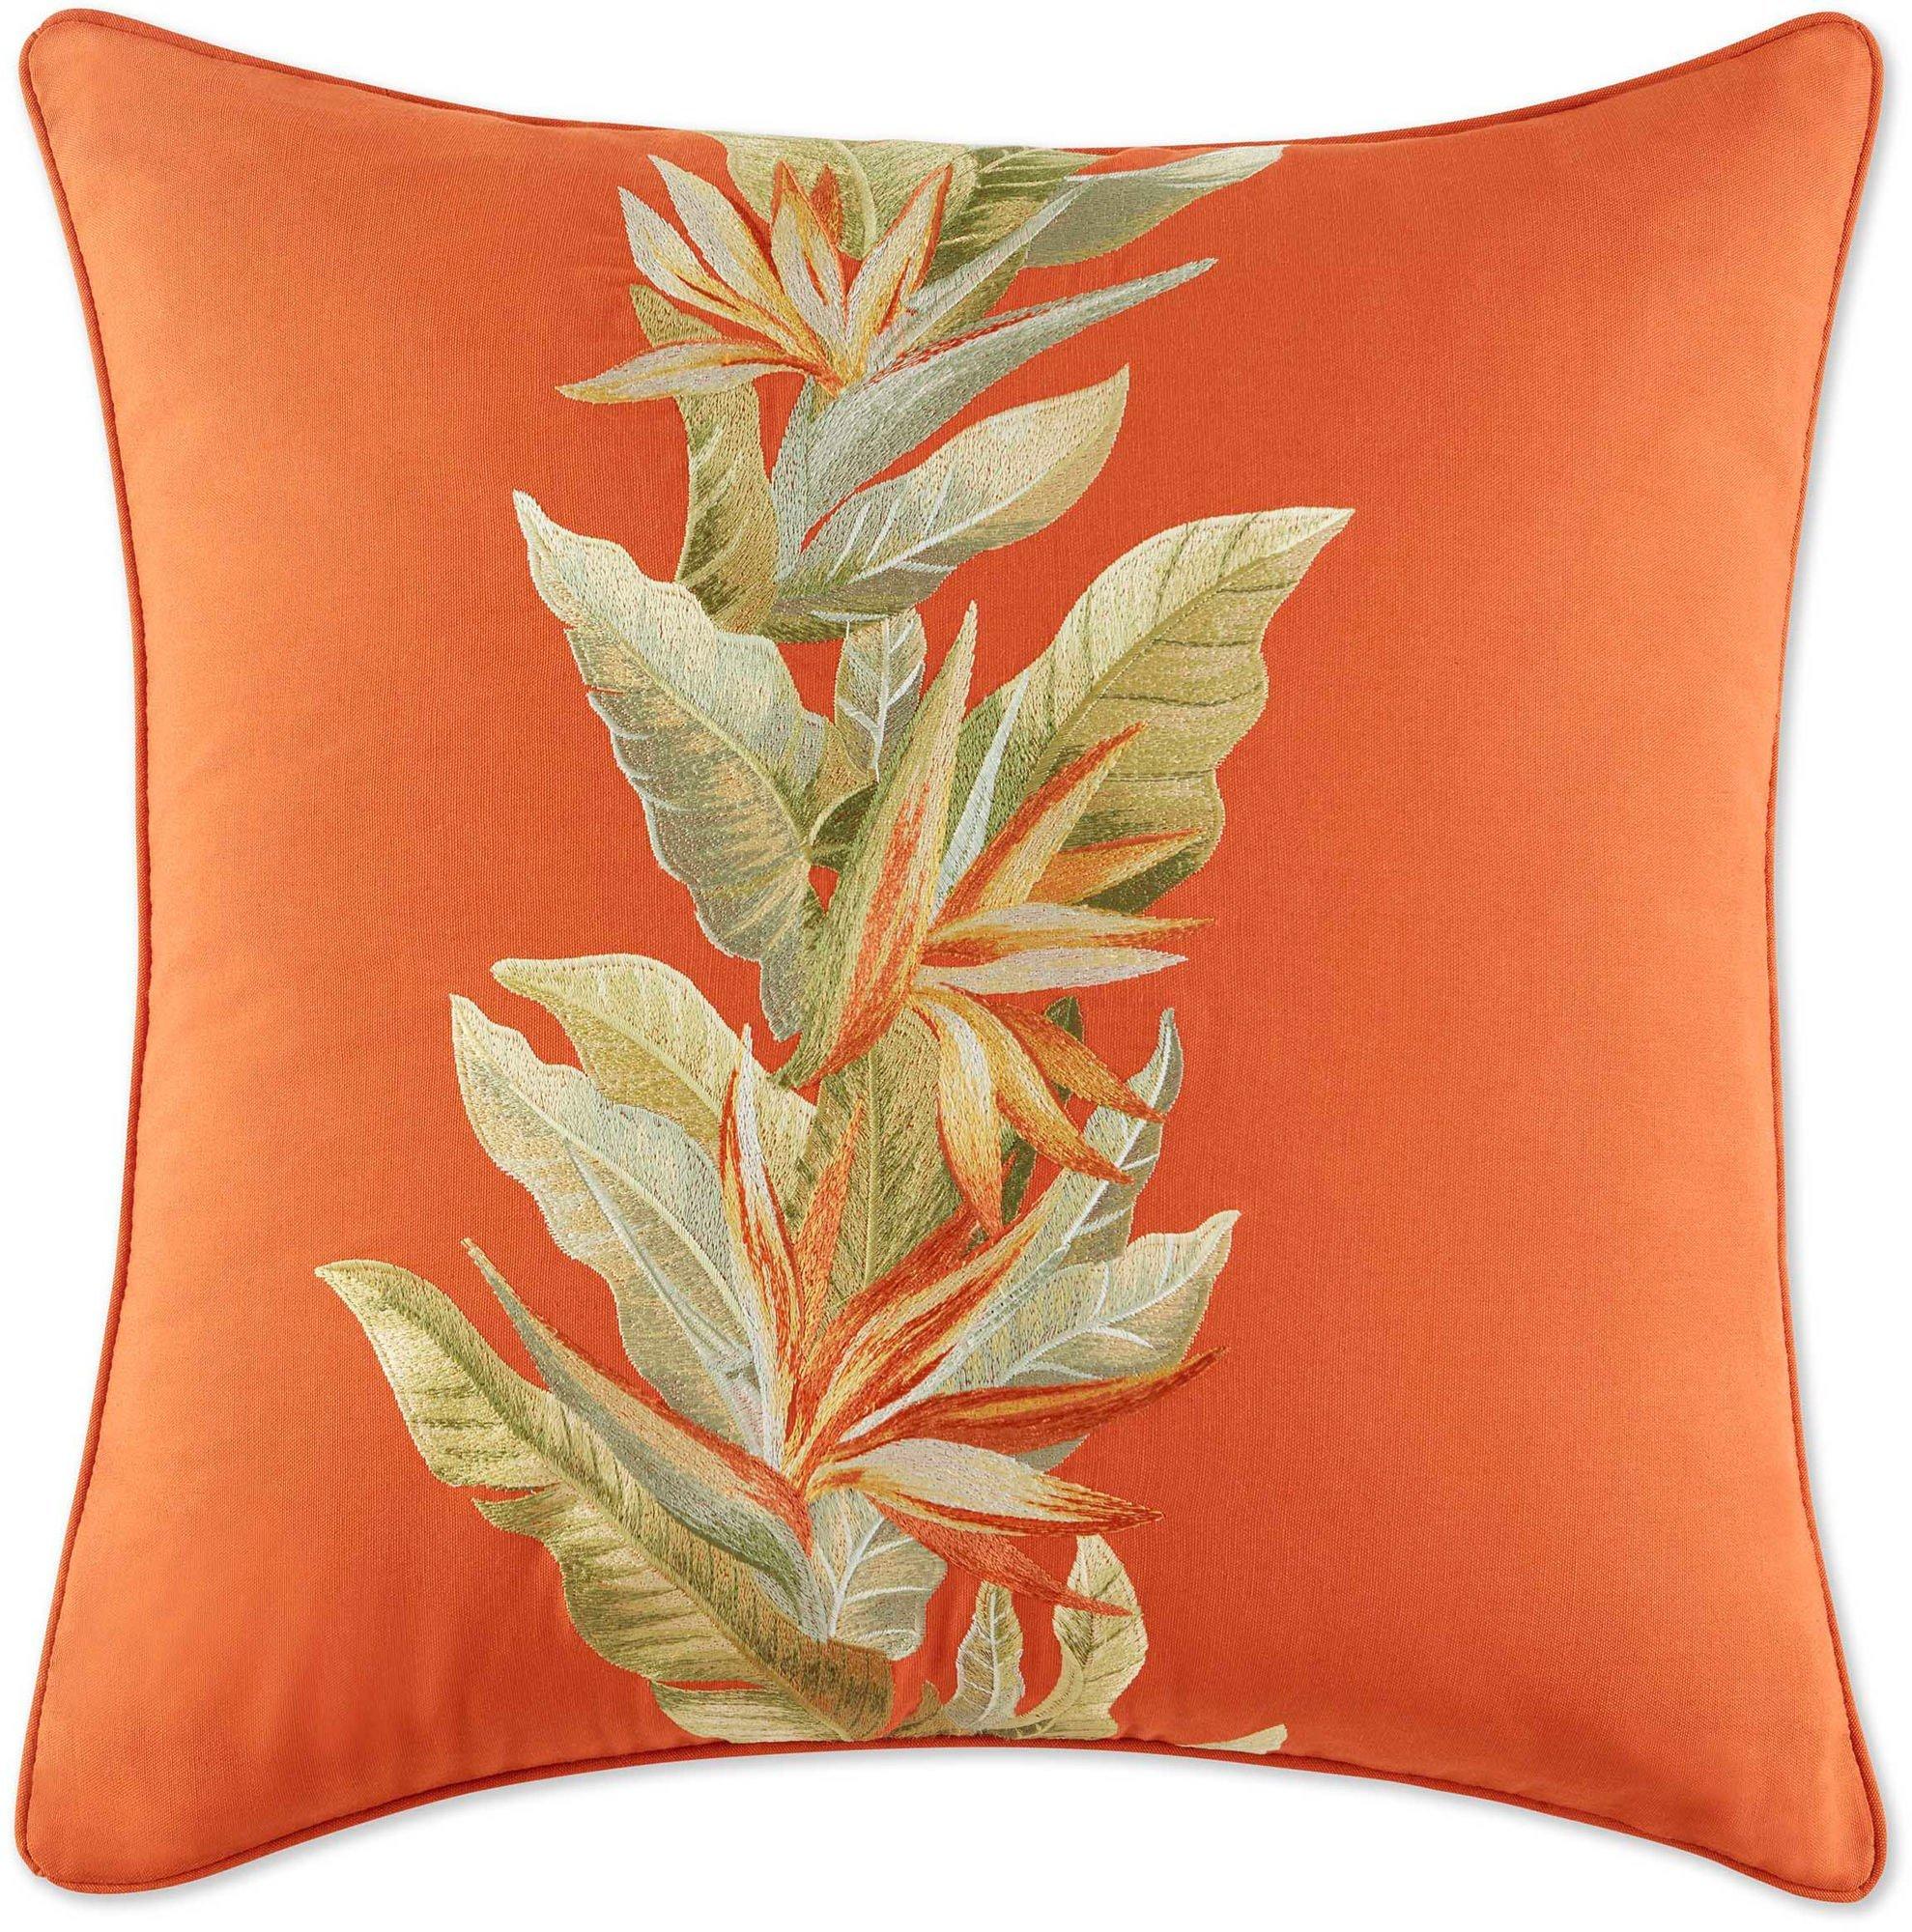 Tommy Bahama 20x20 Birds of Paradise Square Pillow